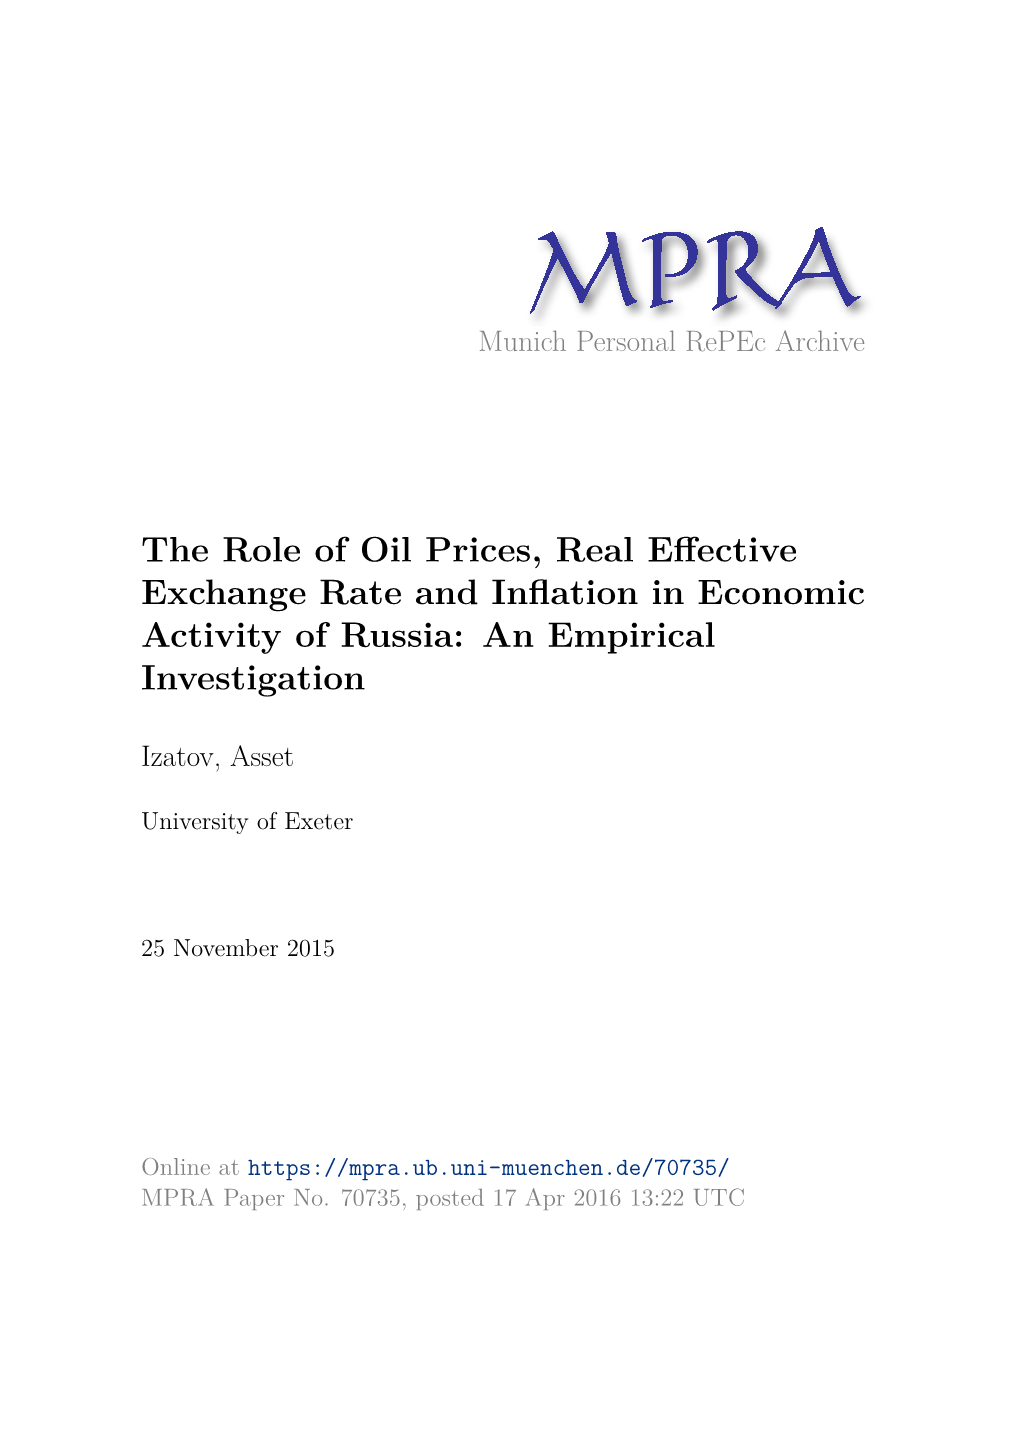 The Role of Oil Prices, Real Effective Exchange Rate and Inflation in Economic Activity of Russia